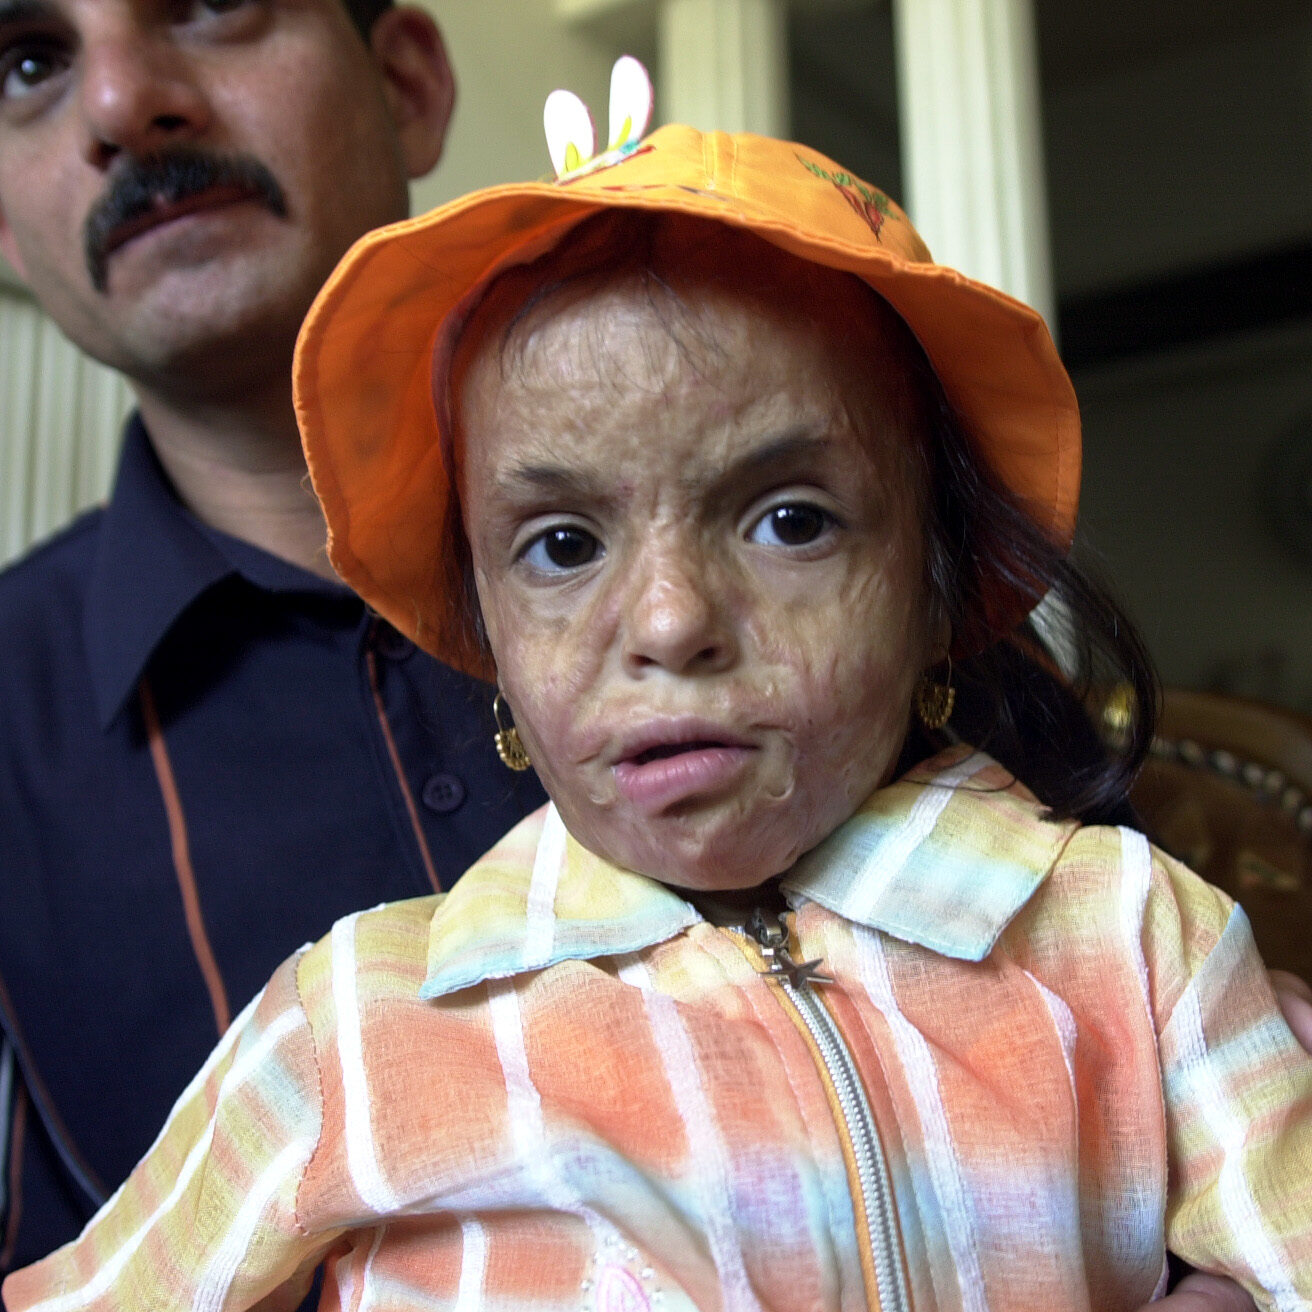 Teba Furat, 4, with her father Fahdel, 27, in Baghdad, Iraq, on June 5, 2006.  Teba suffered second degree burns on her face, scalp, and both hands during a roadside bombing in the provincial capital of Baquba on Sept. 2, 2003.  Fahdel worries his daughters deformities will trouble her when she begins school next year, and may burden her throughout her life if not corrected.
Iraqi plastic surgeons, once limited to correcting congenital defects and performing elective cosmetic surgery, now say they are inundated with war-related injuries.  
JAMES PALMER/FOR THE STAR-LEDGER